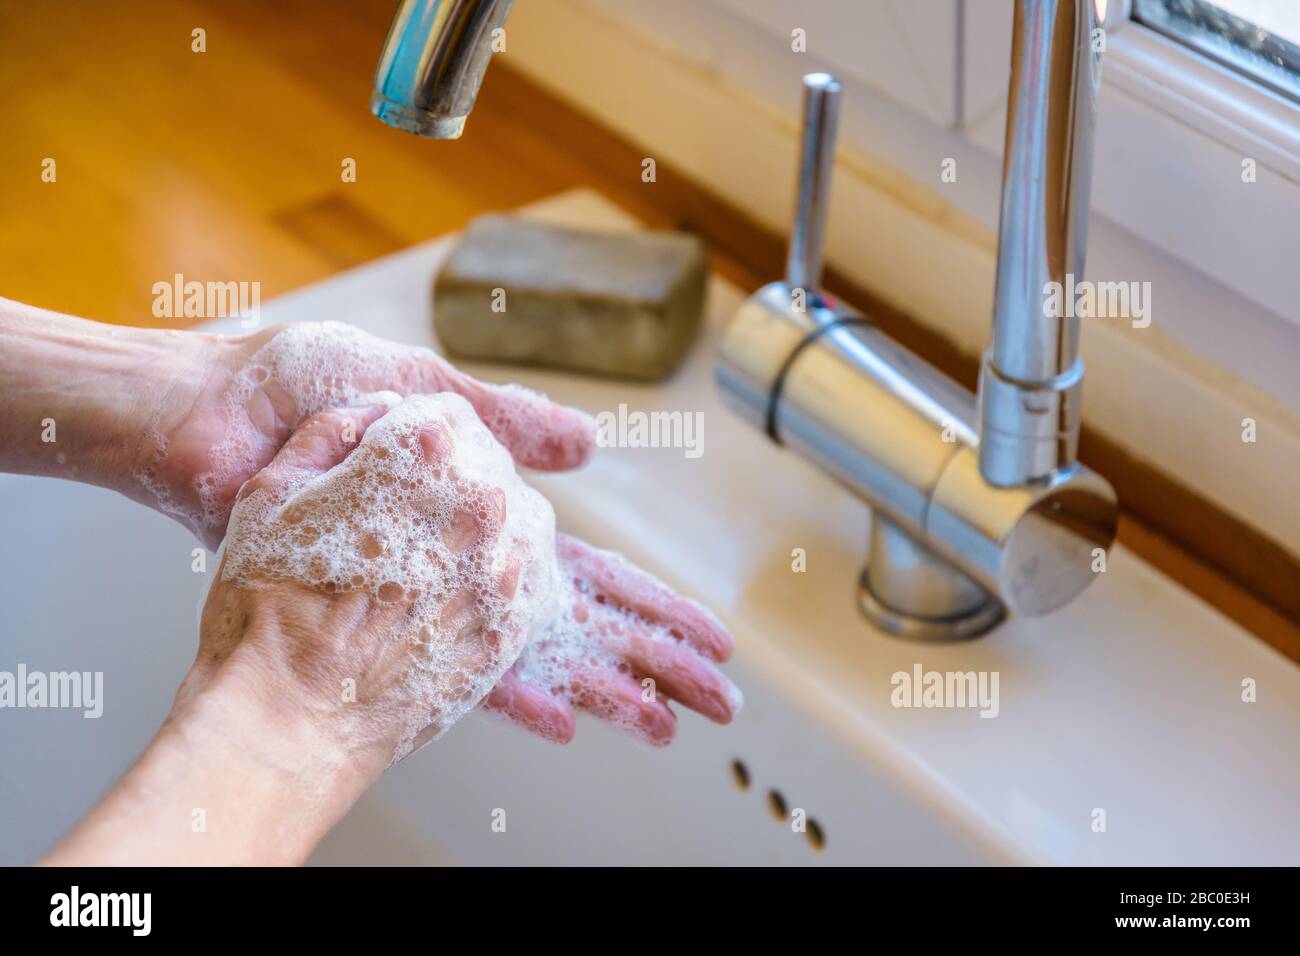 Close-up view on the hands of a woman washing her hands thoroughly with soap under the faucet of the kitchen sink. Stock Photo